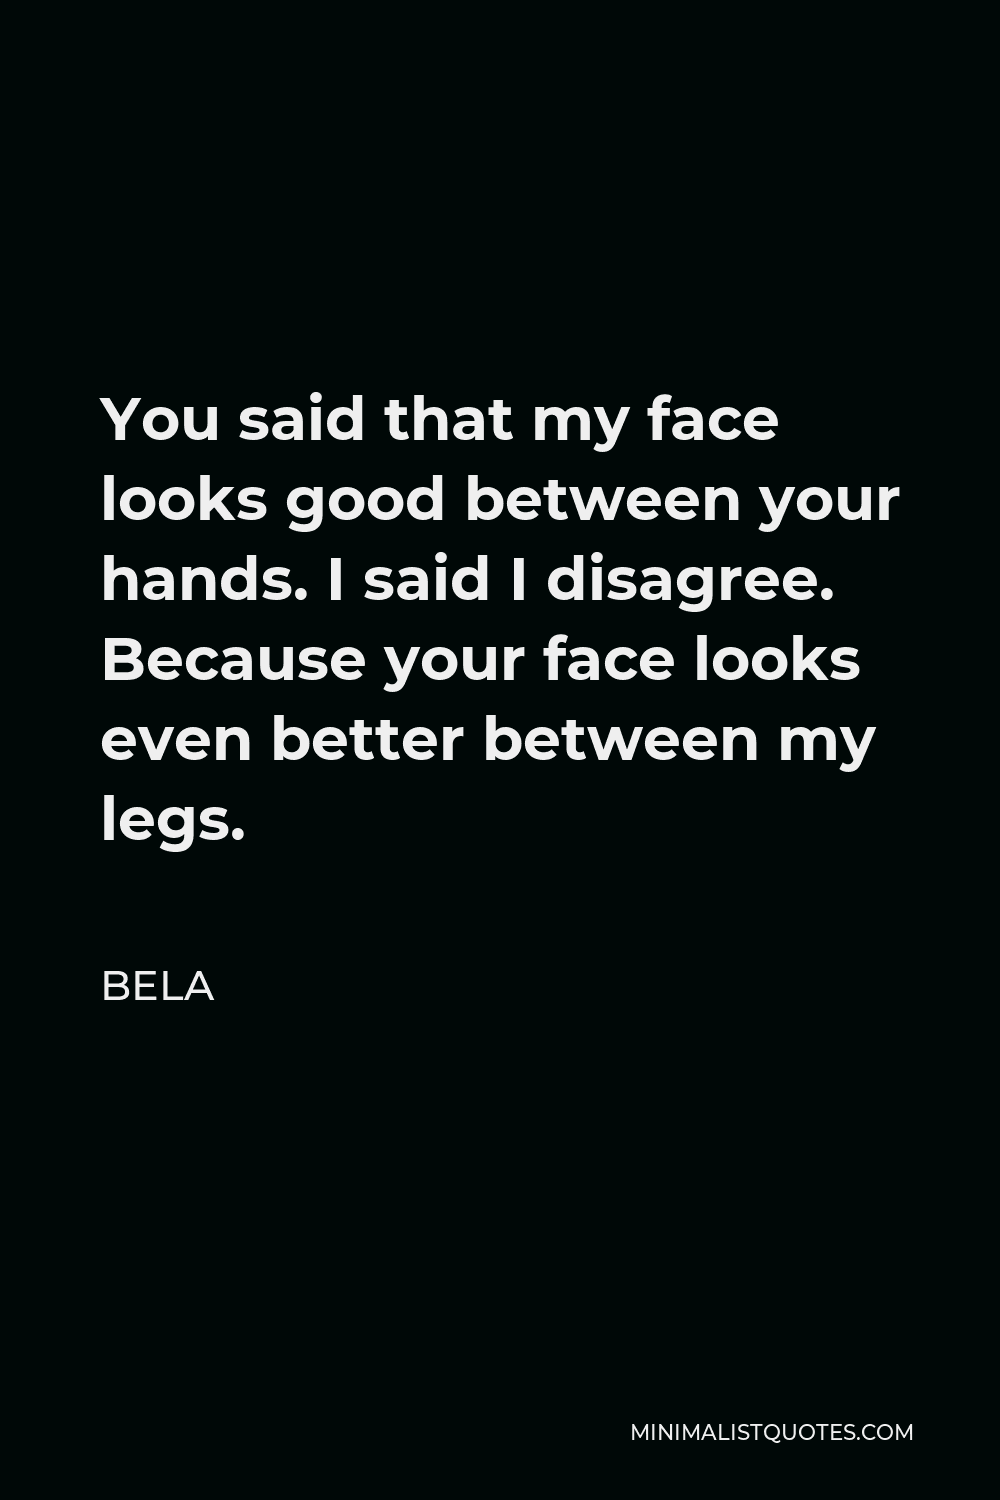 Your face would look better between my legs.